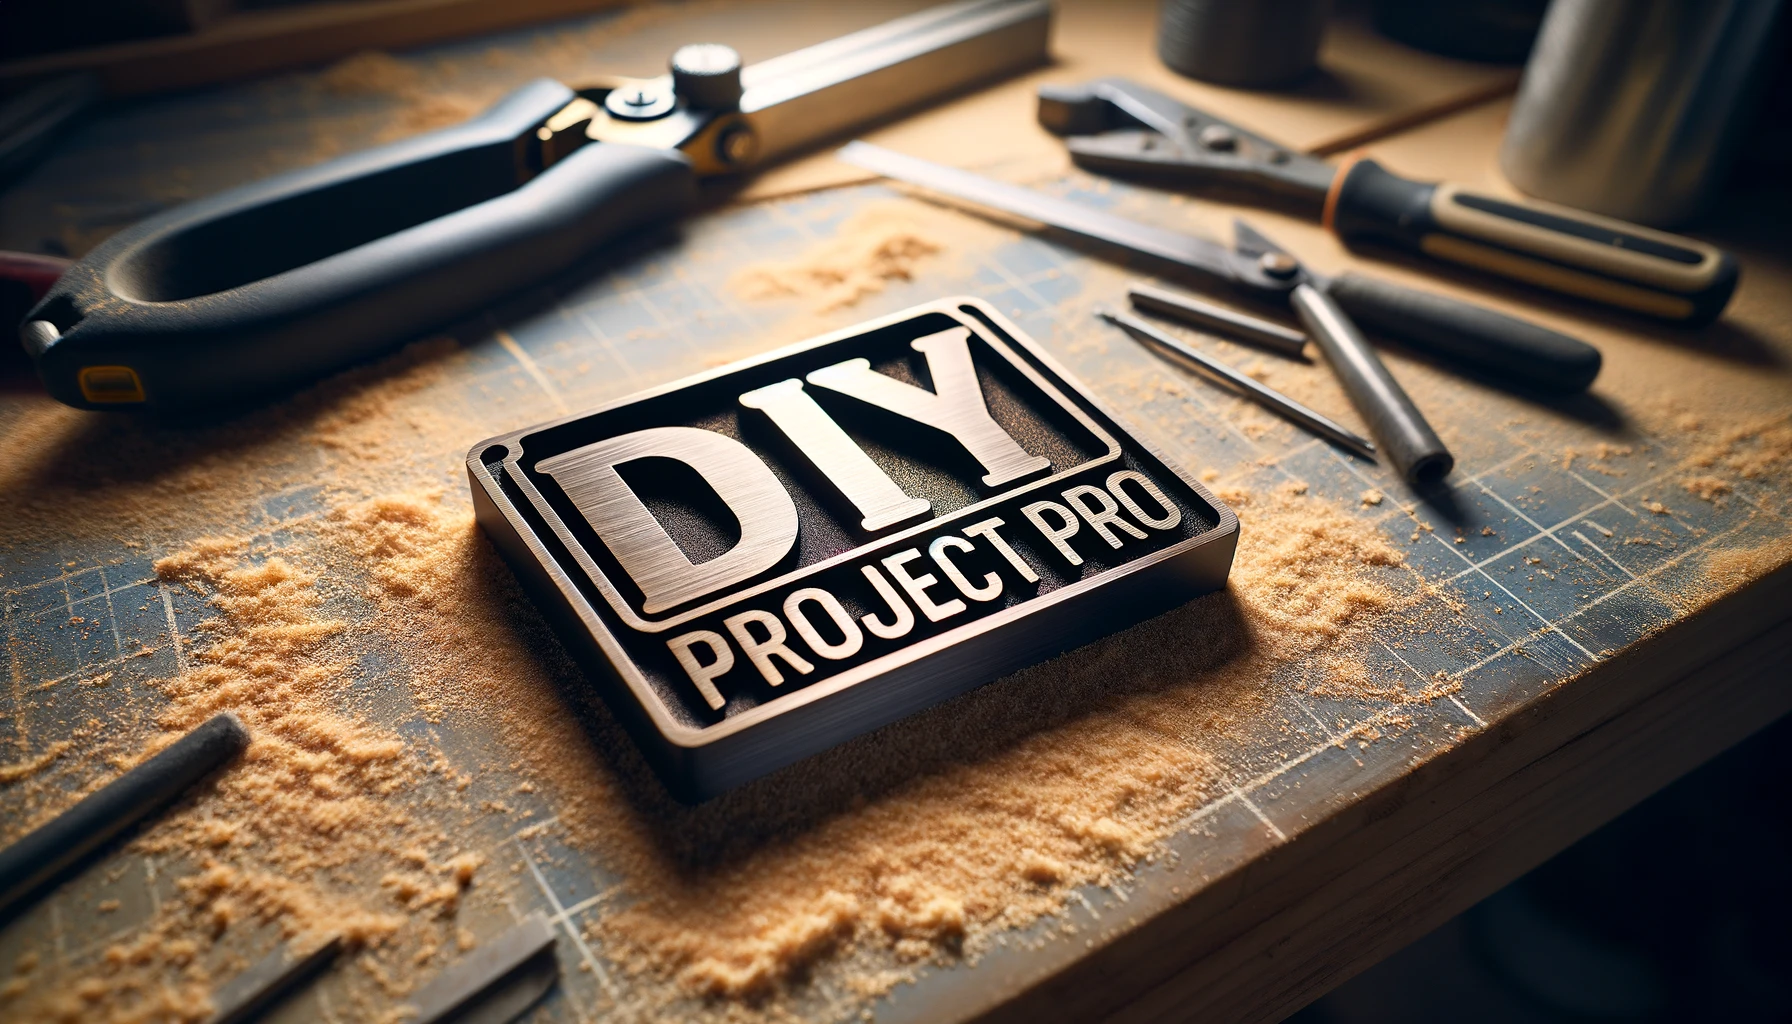 DIY Project Pro sign on a workbench